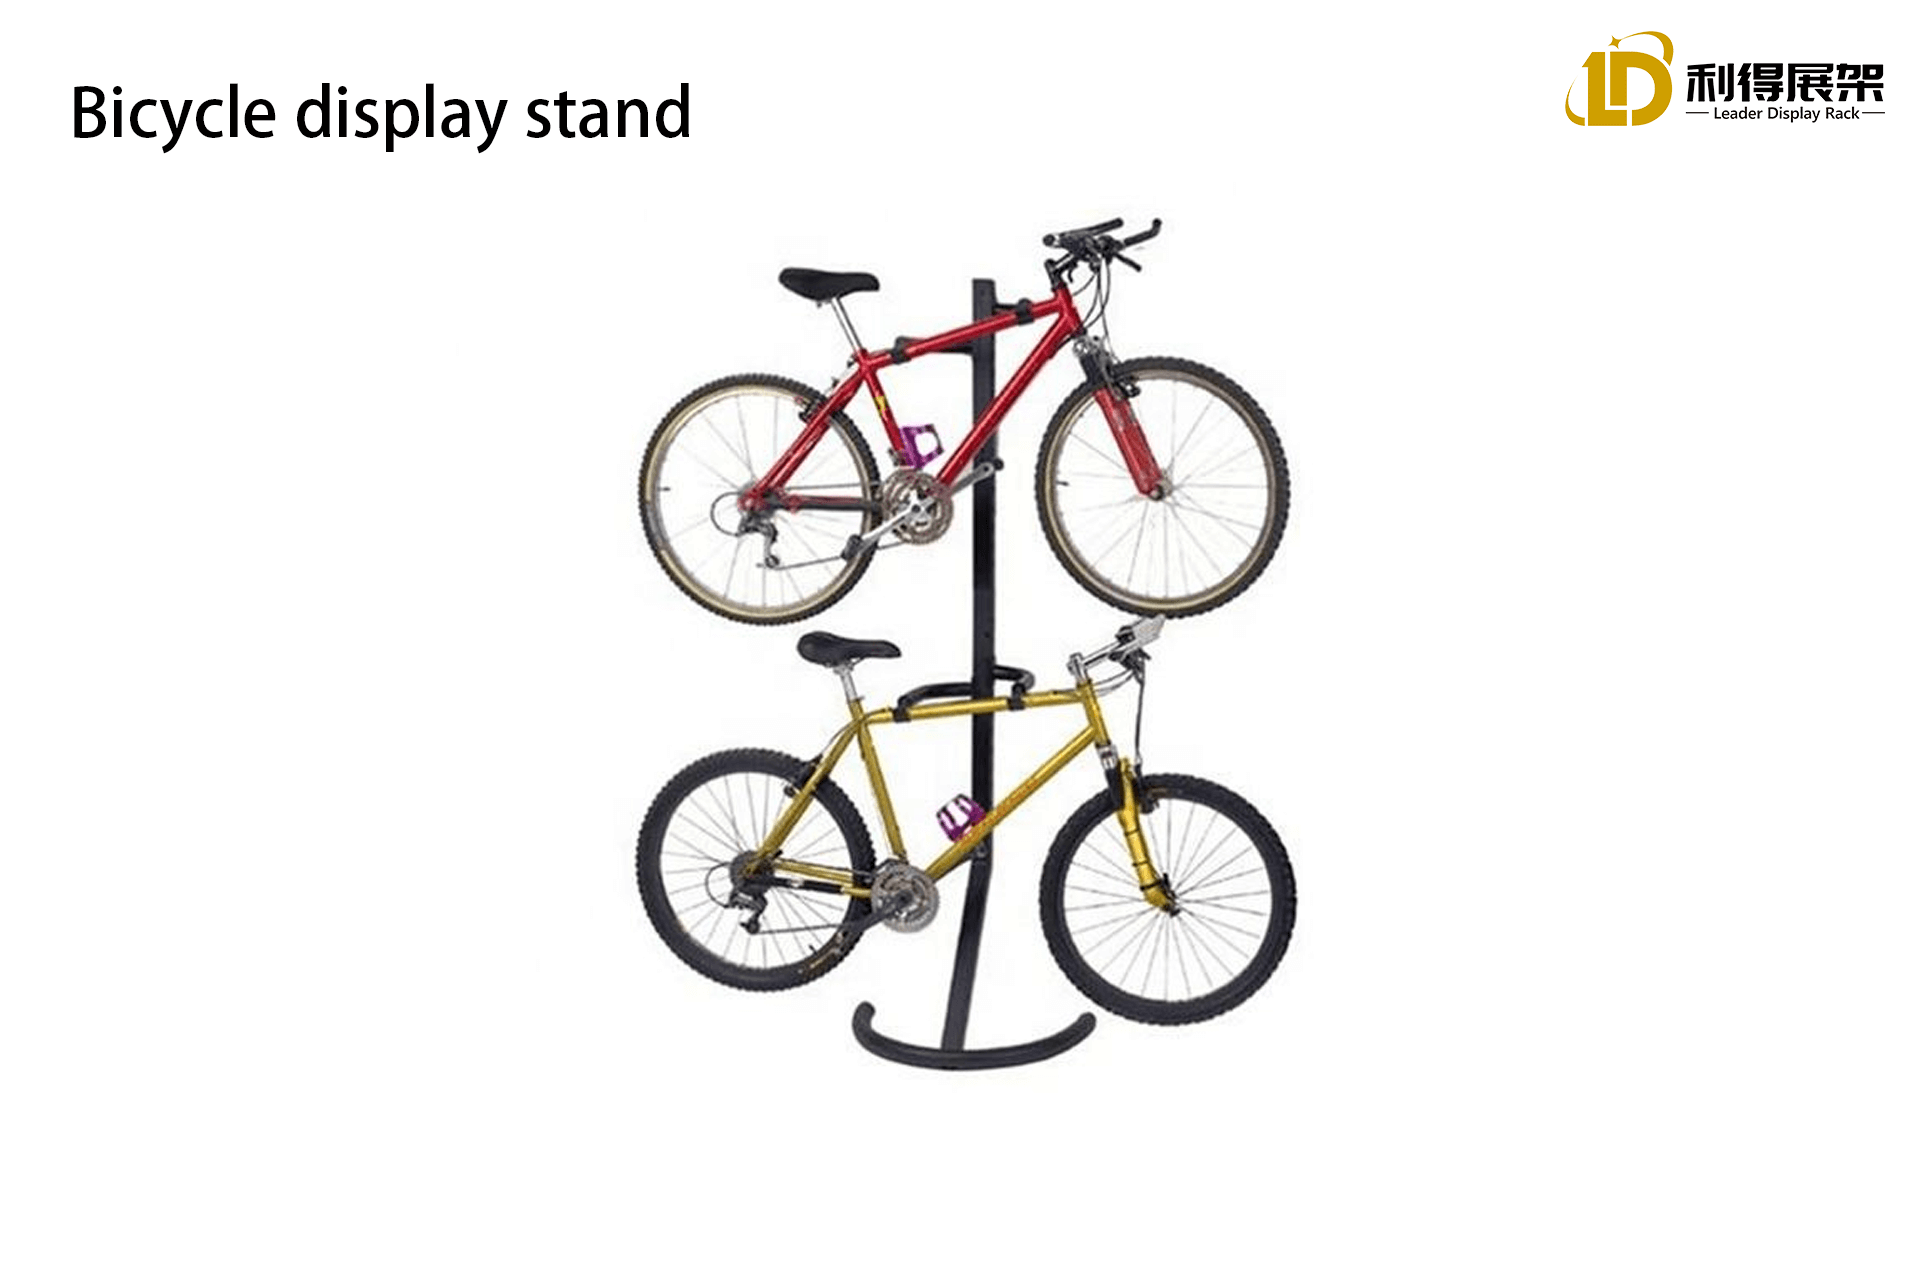 Bicycle display stand